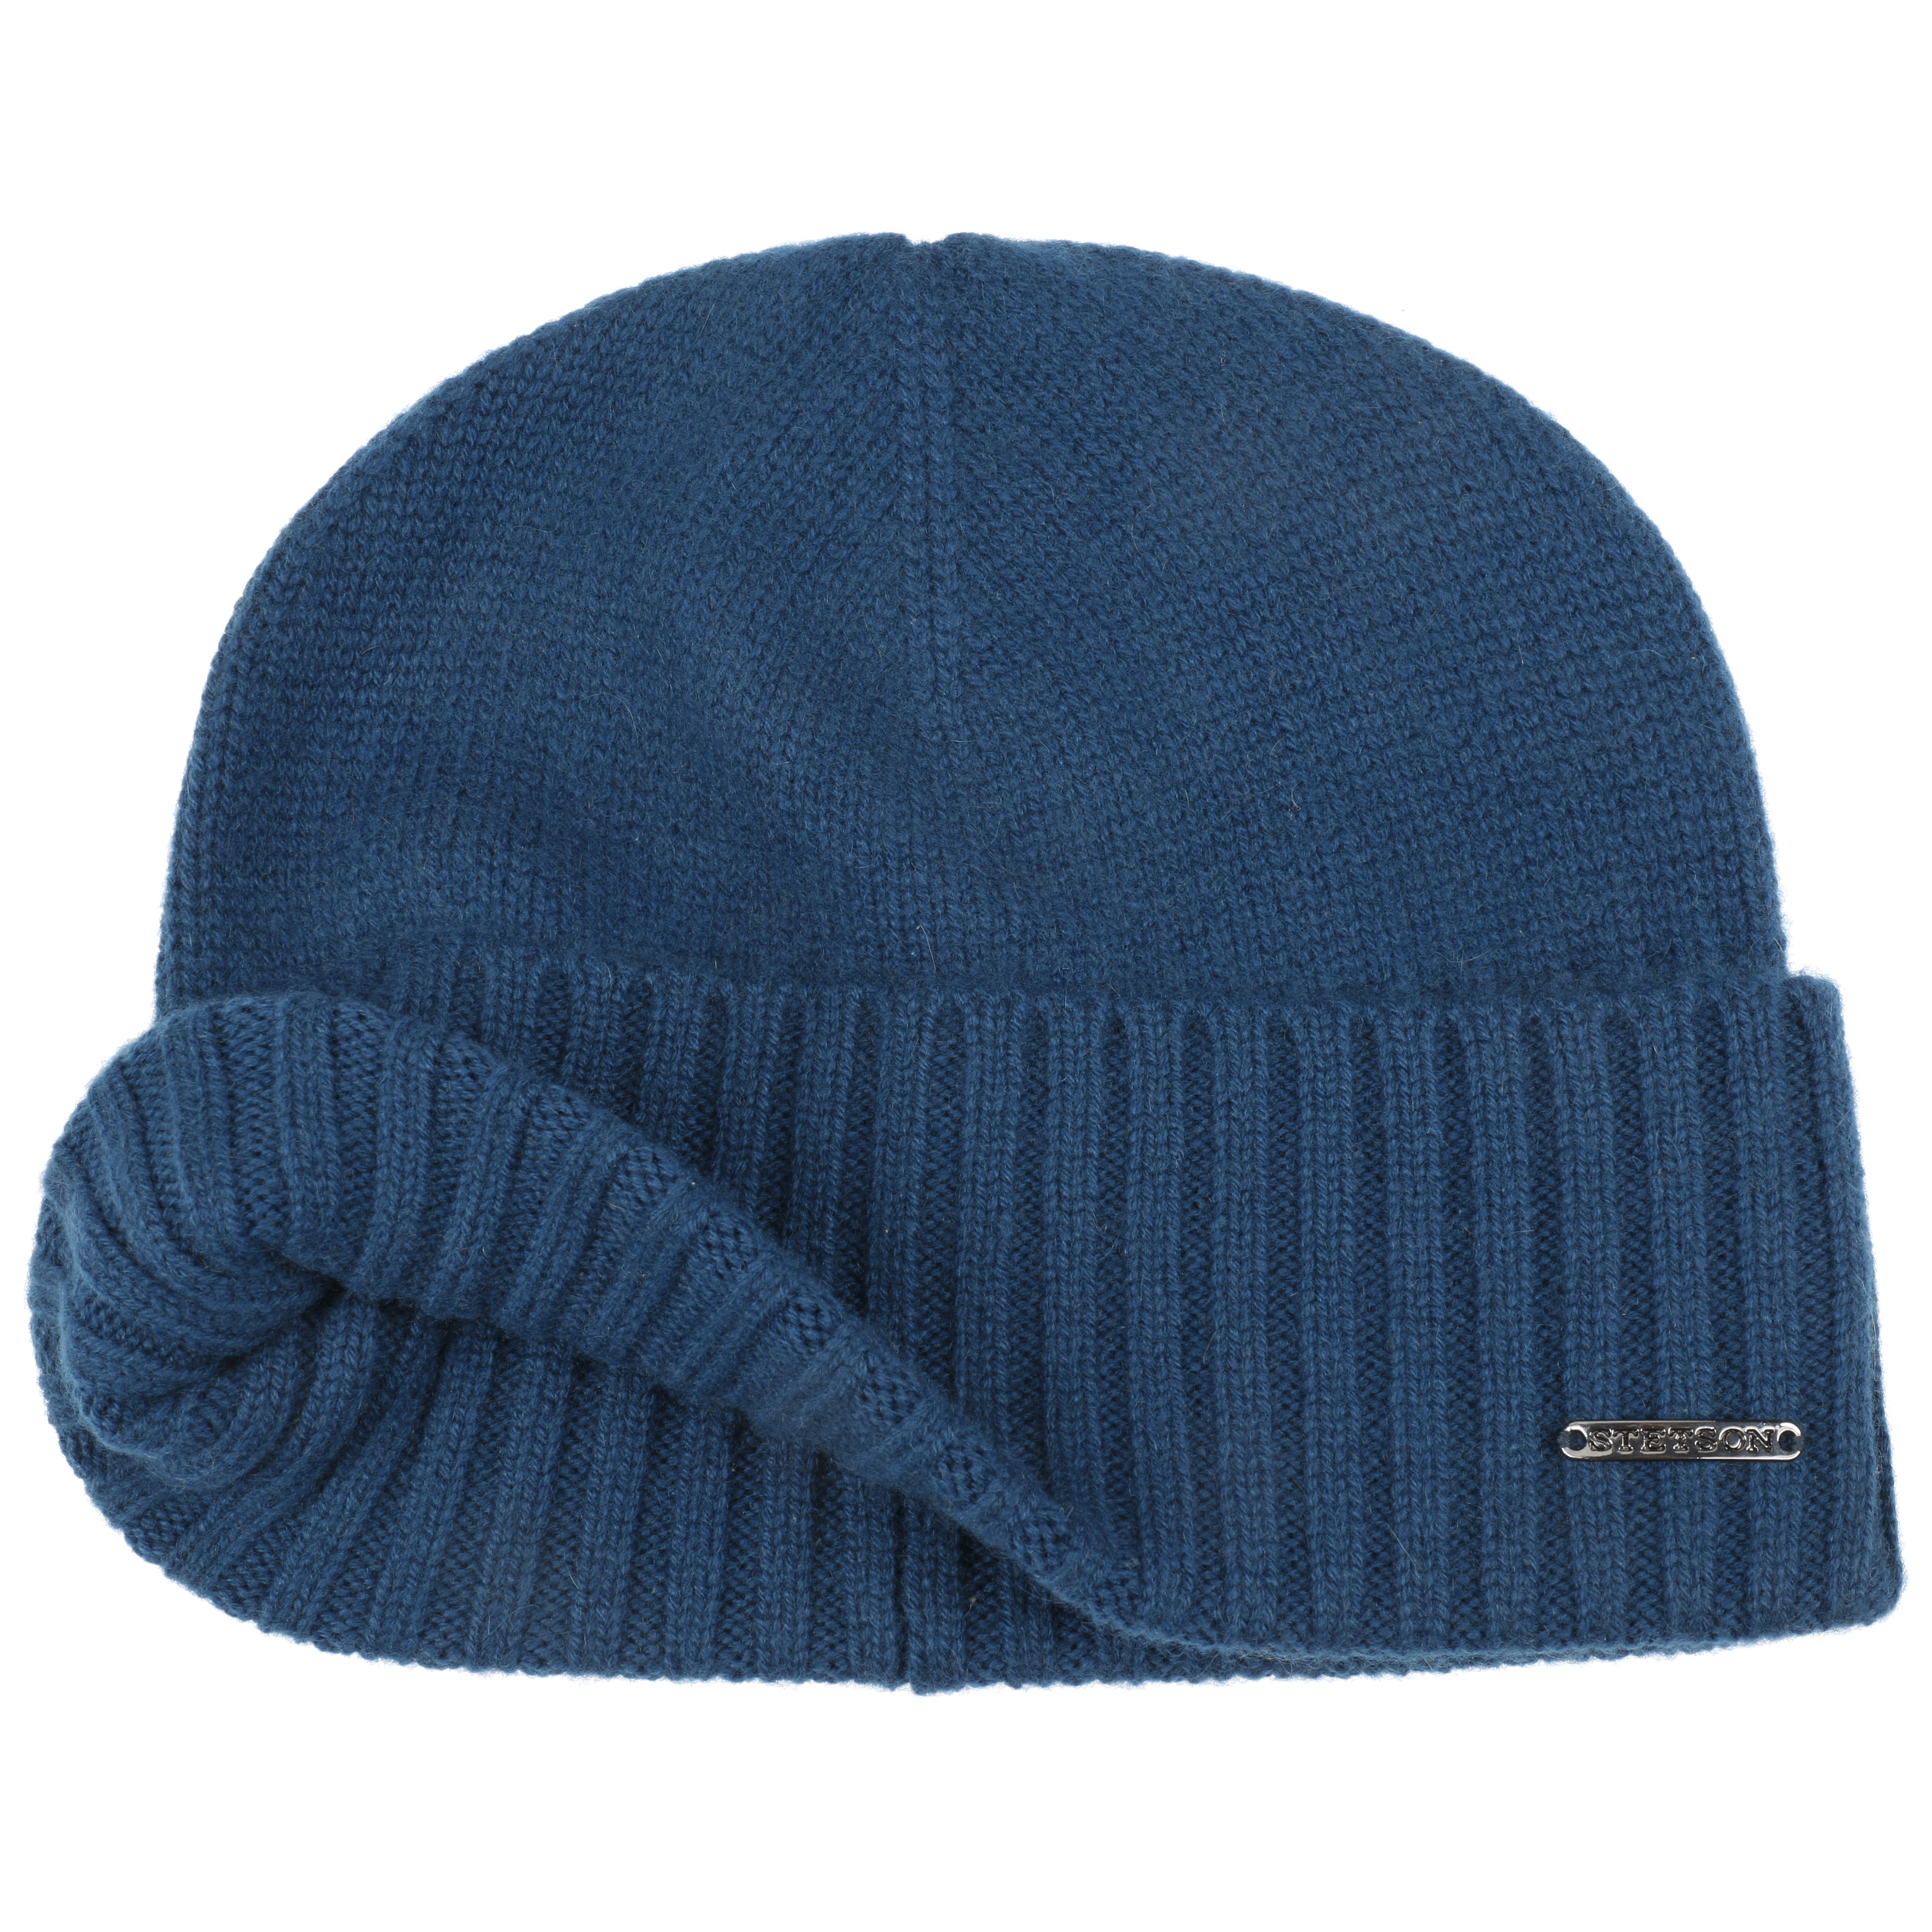 Saratoga Cashmere Pull on Hat by Stetson --> Shop Hats, Beanies & Caps ...